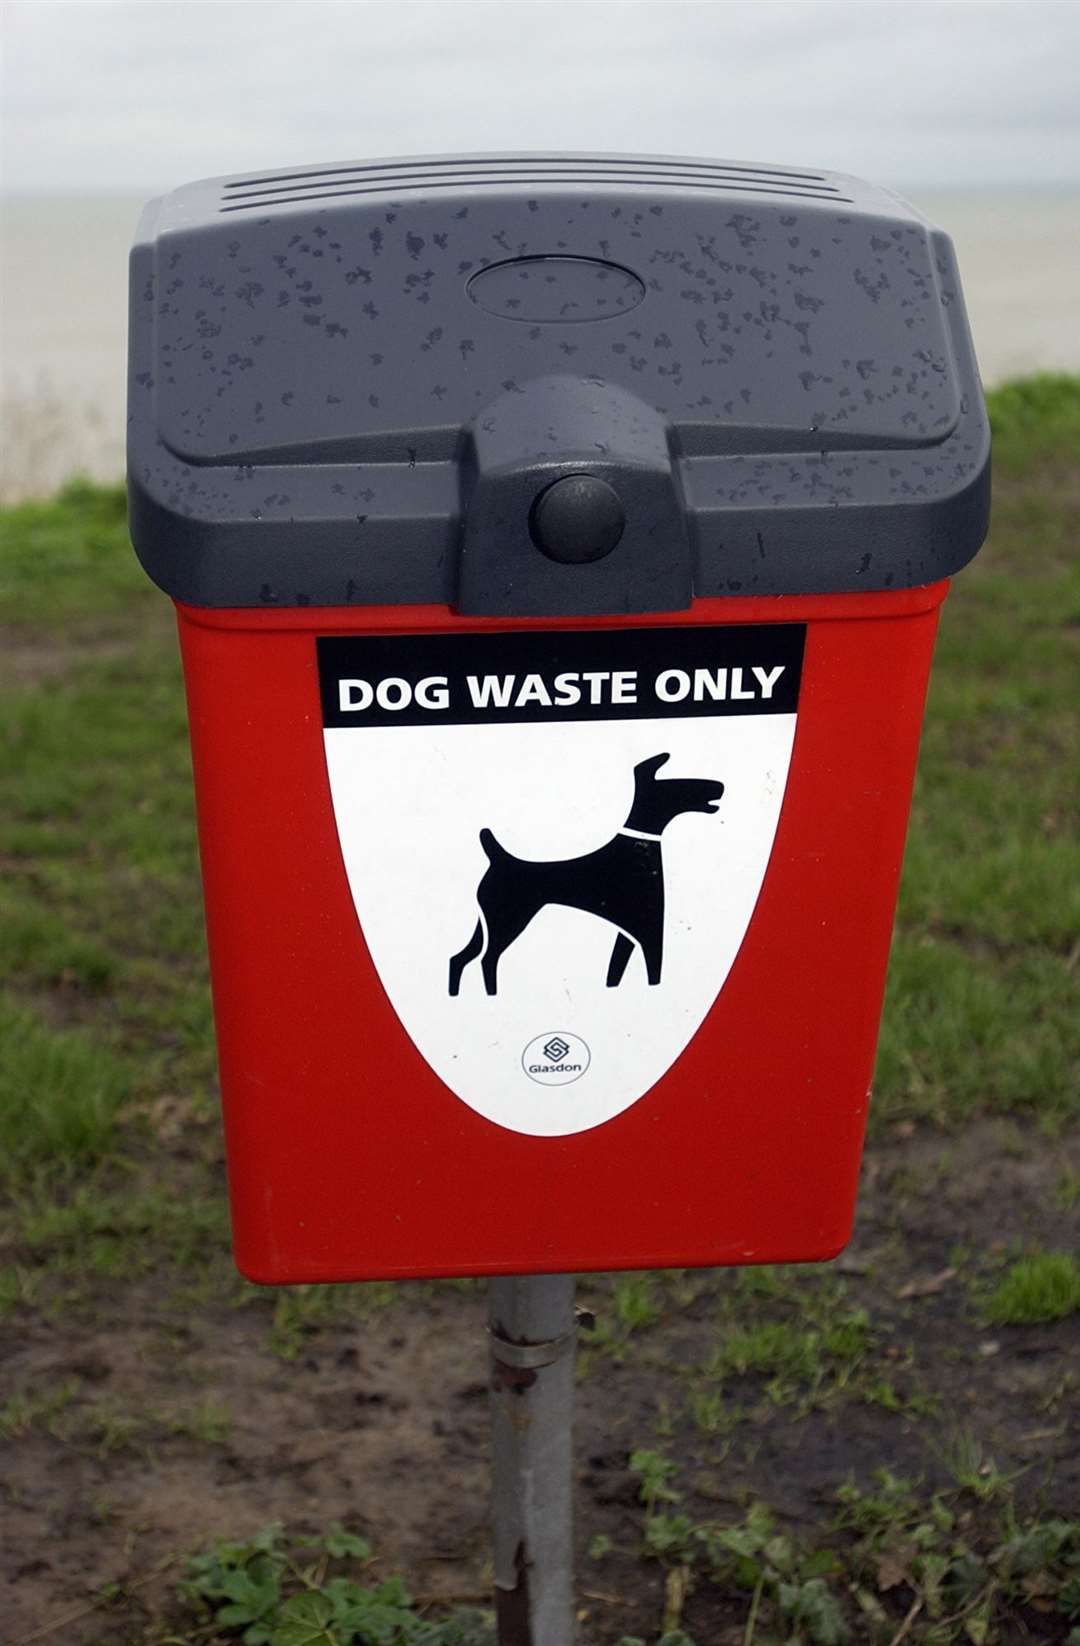 The council says it will replace one of the bins